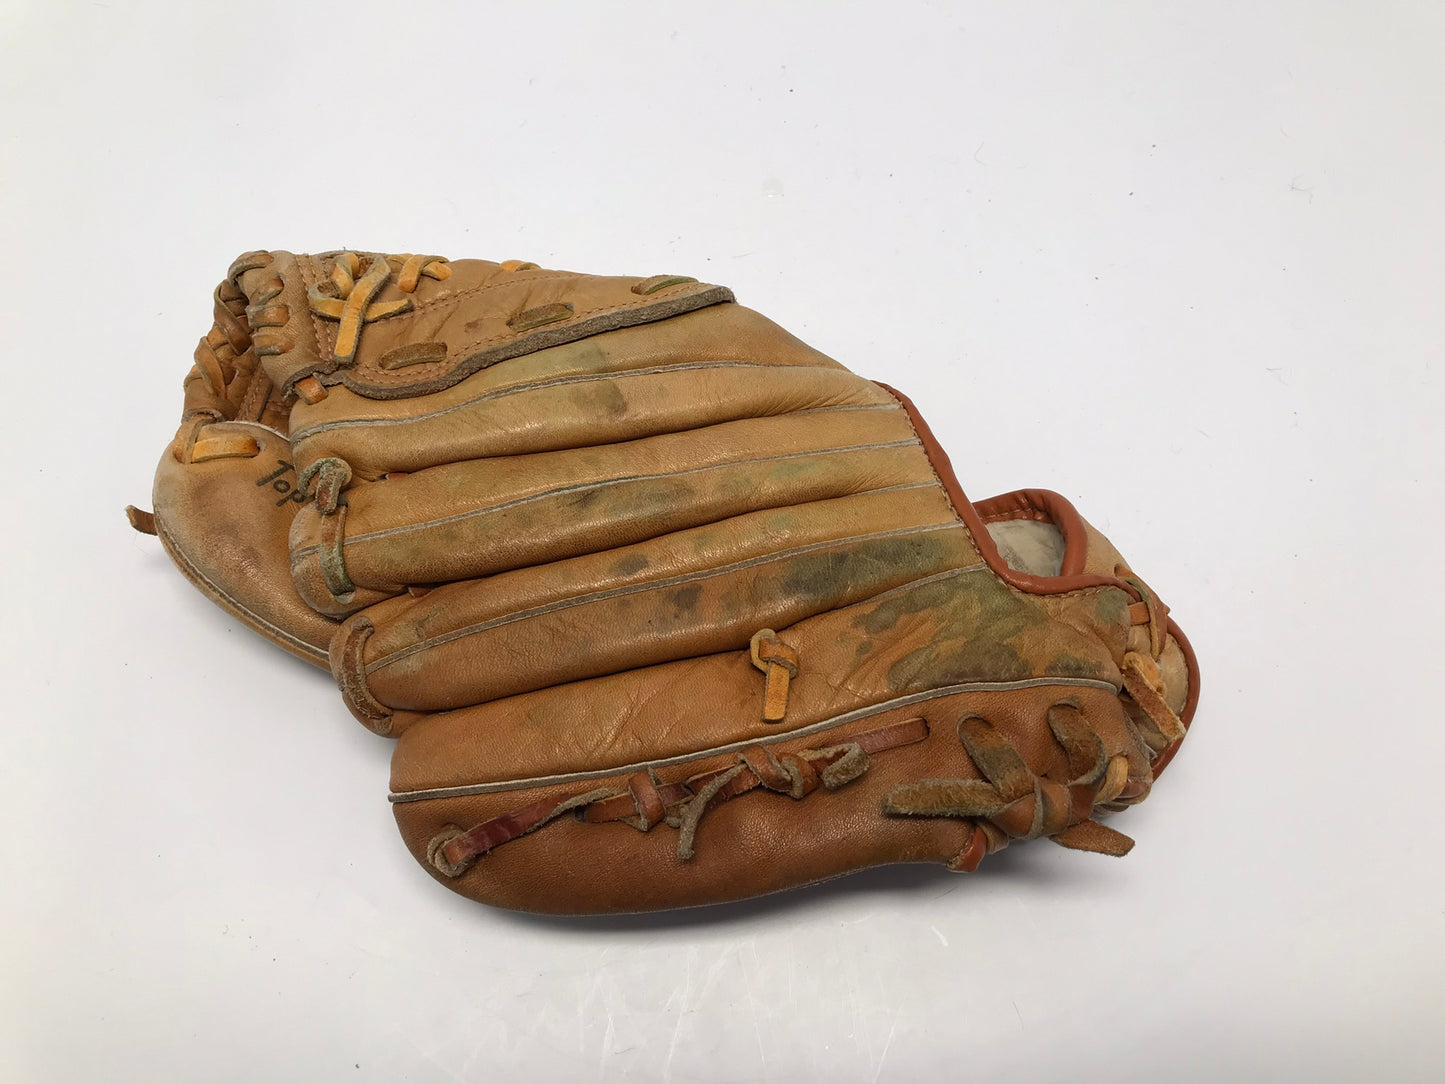 Baseball Glove Adult Size 12 inch Cooper Vintage Brown  Leather Fits on Left Hand